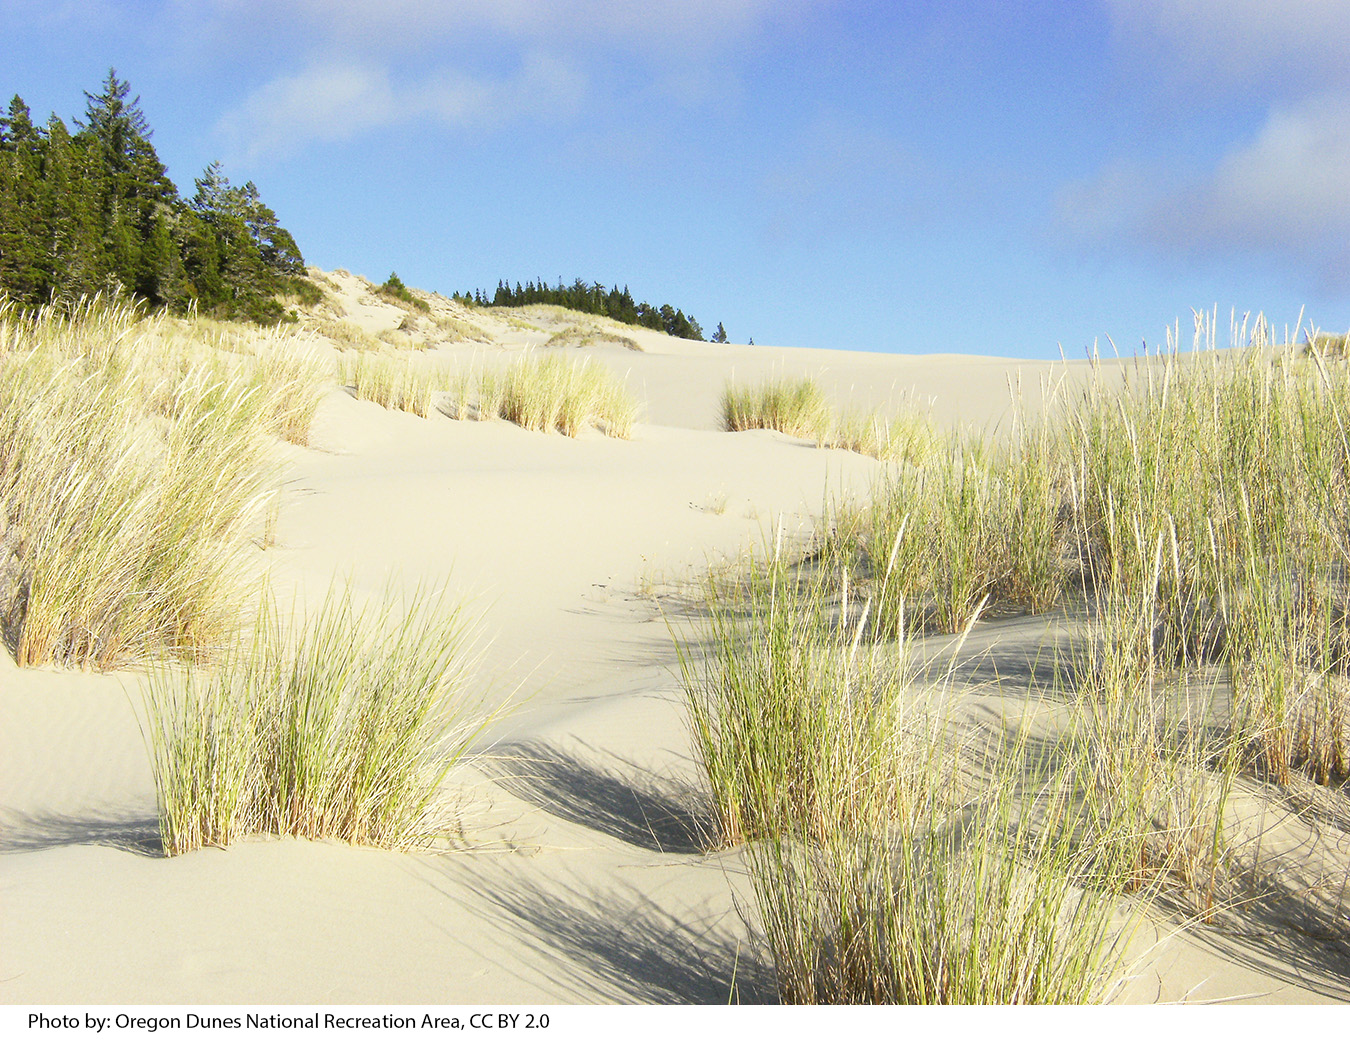 Oregon dunes with grasses in foreground